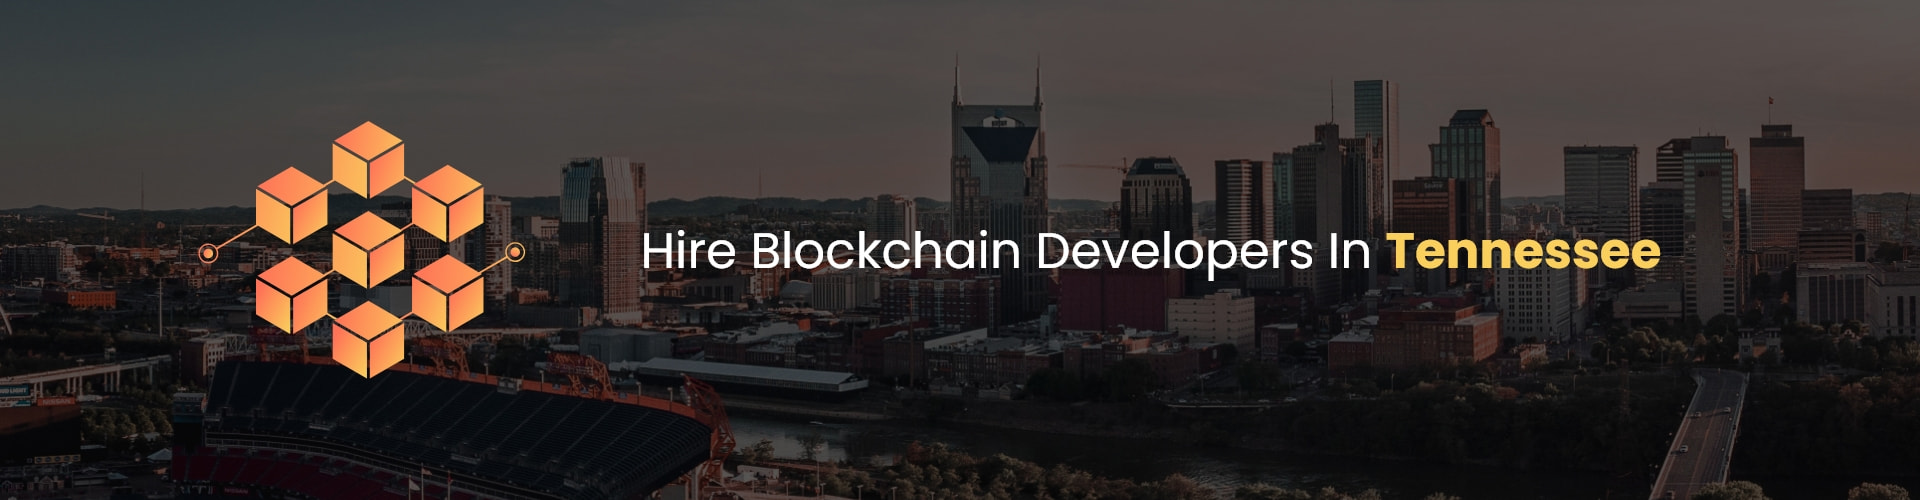 hire blockchain developers in tennessee